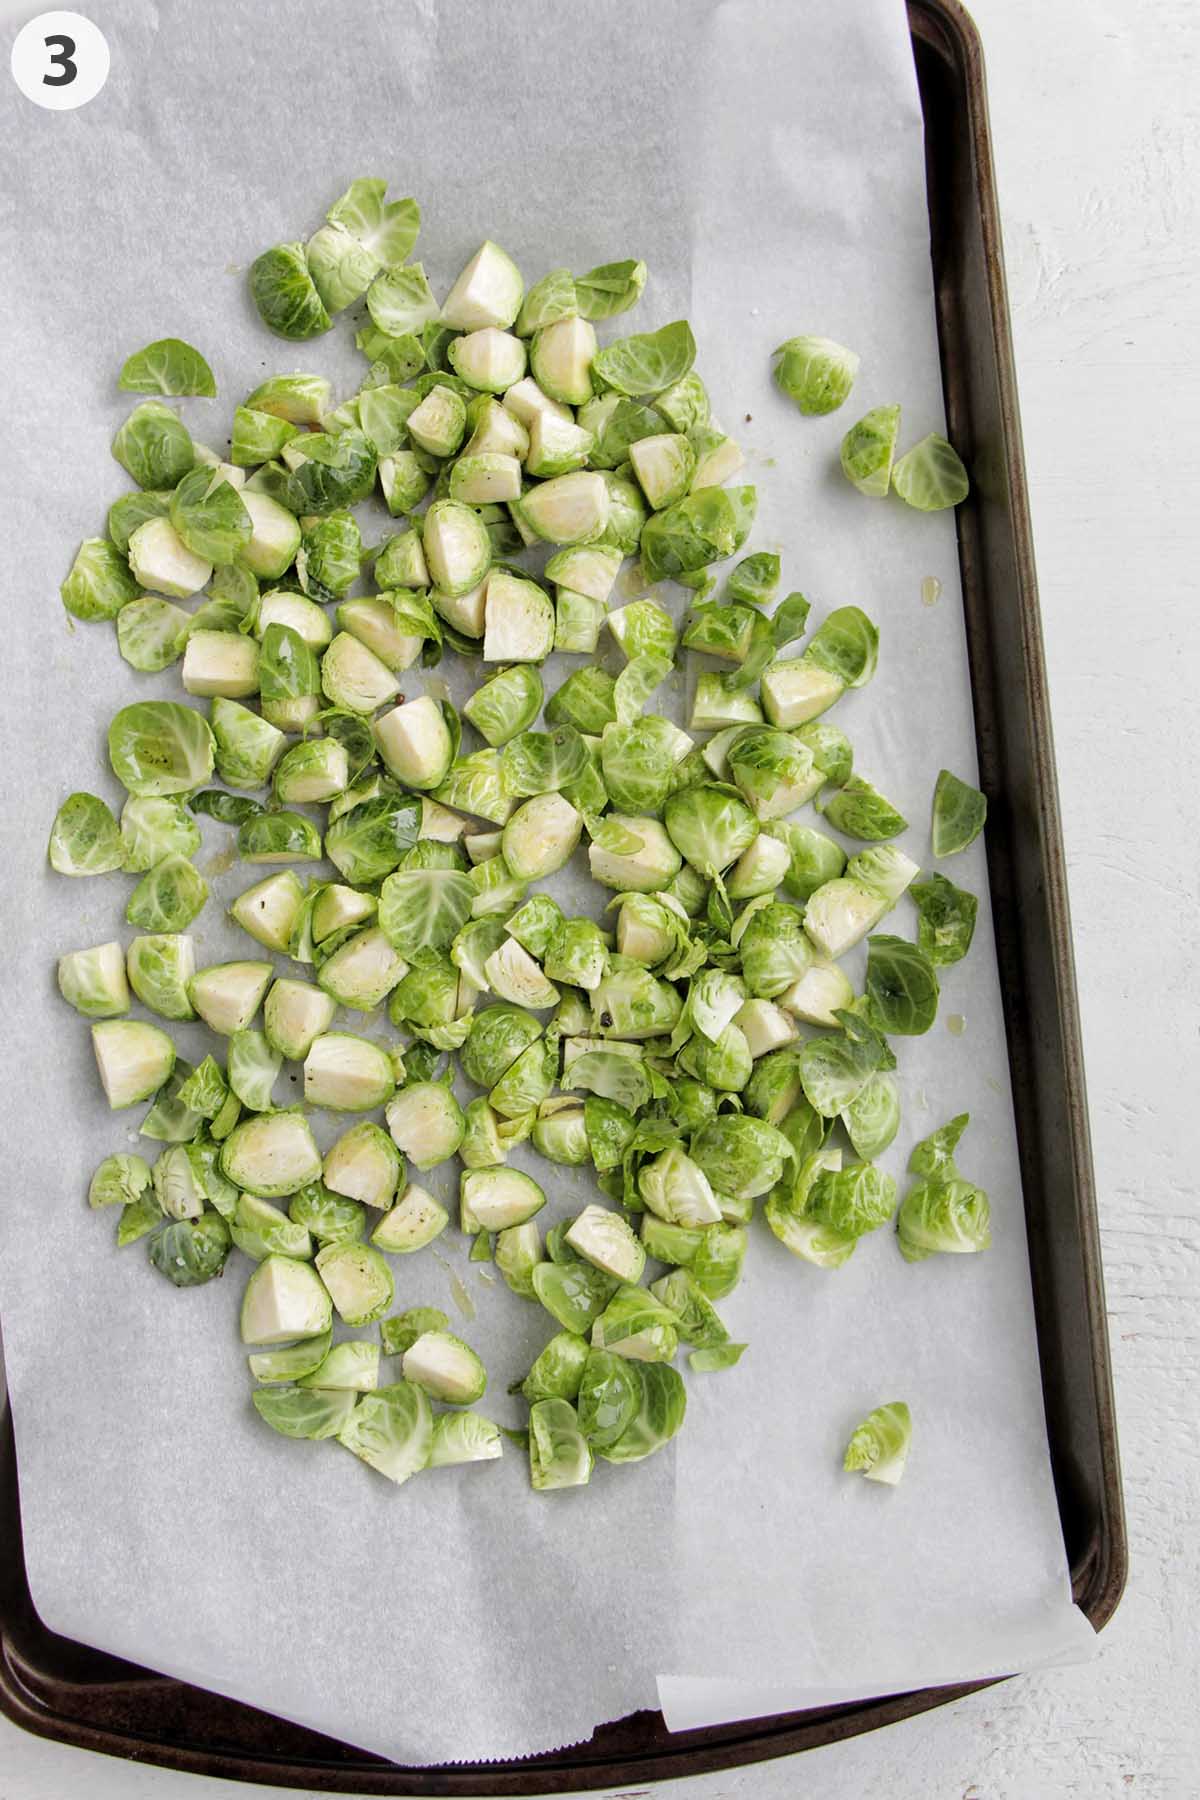 numbered photo showing brussel sprouts on a parchment lined baking sheet.